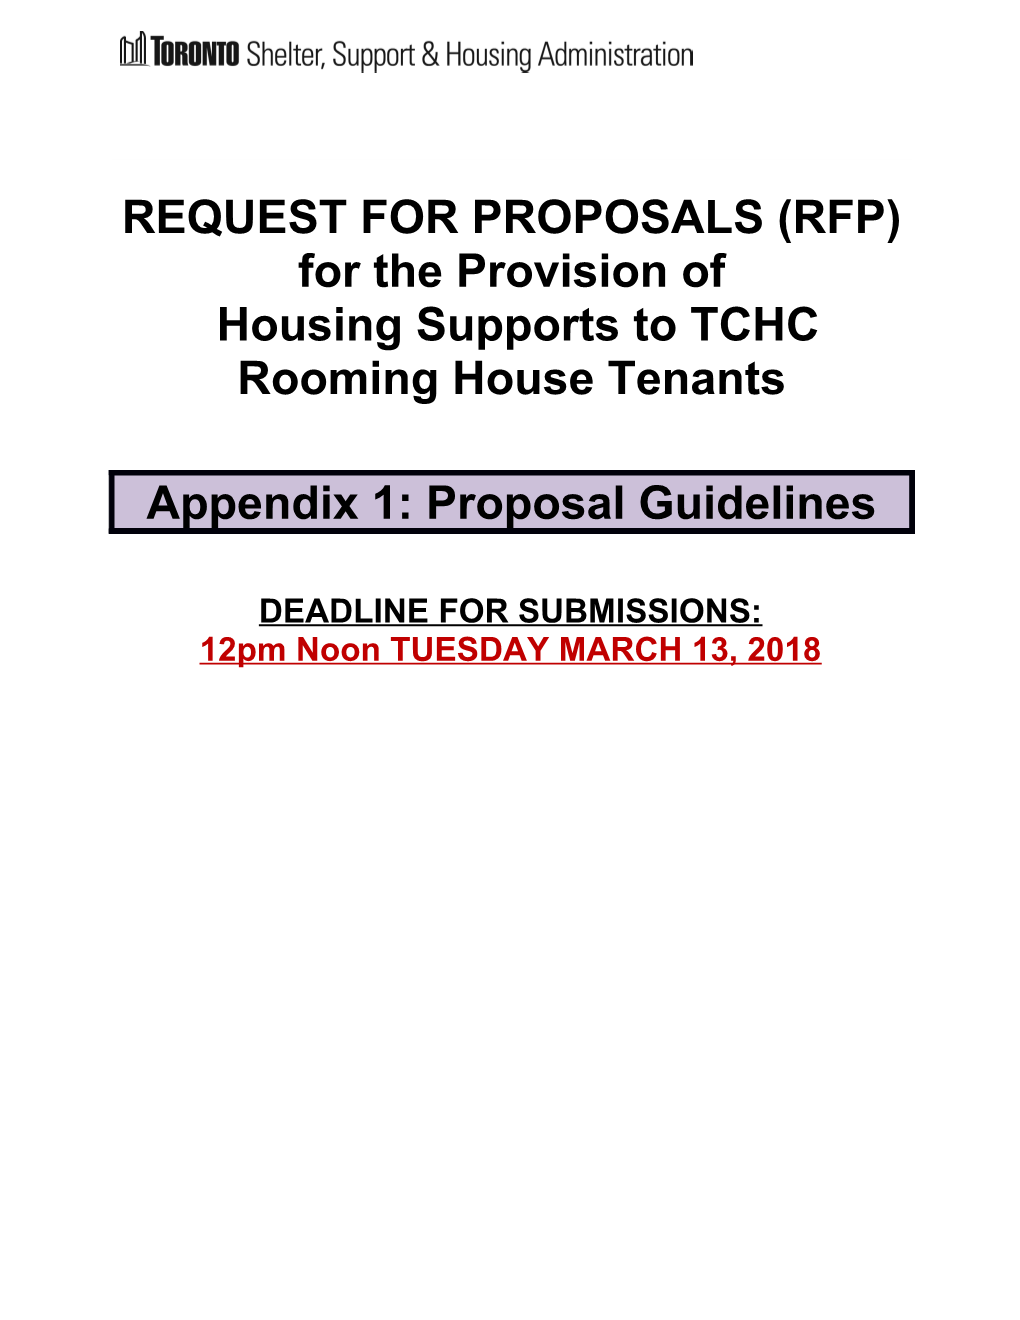 Housing with Layered Supports RFP